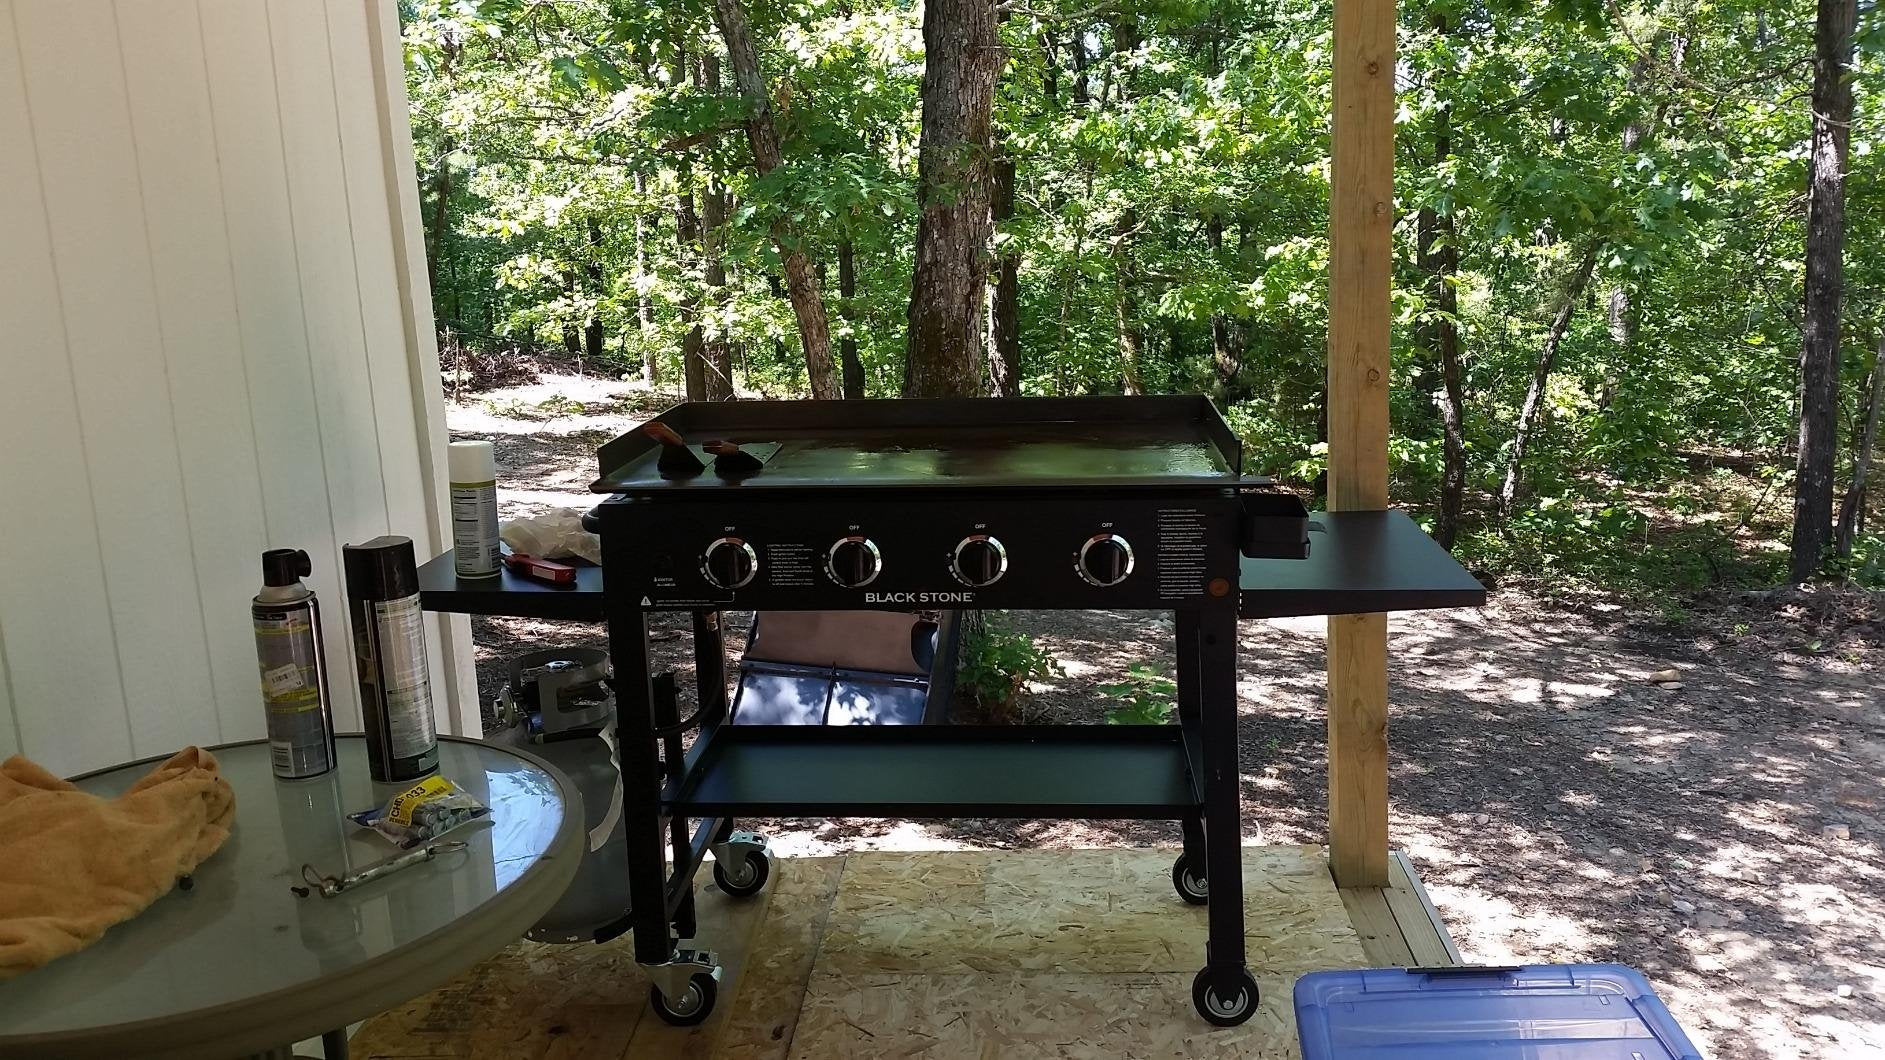 Ideal to cook outdoor